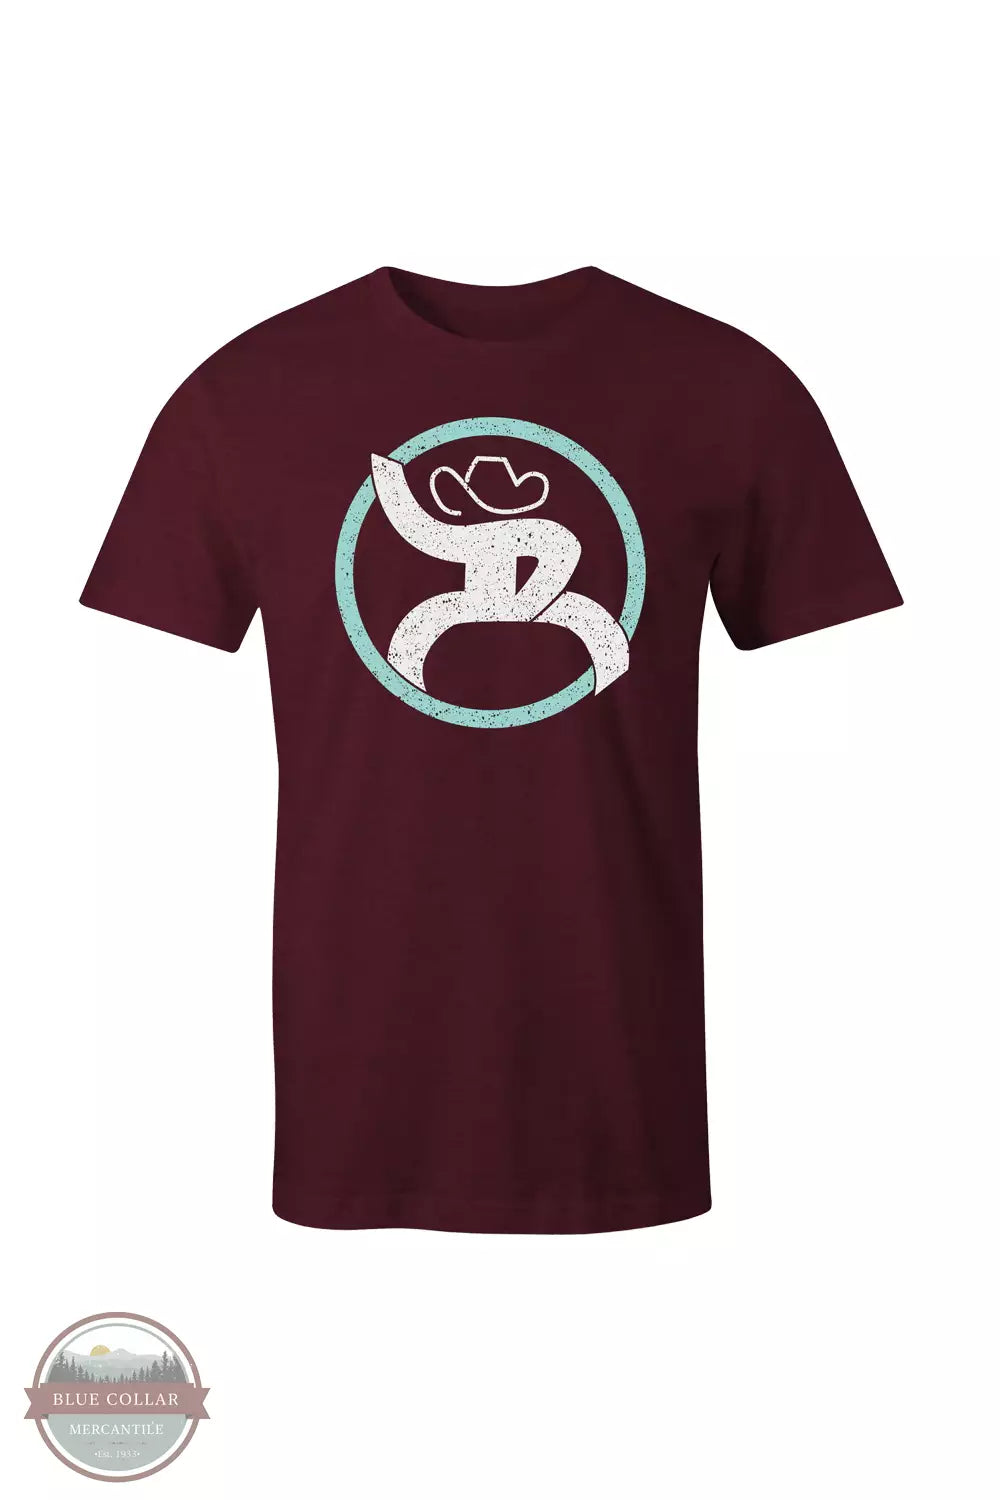 Hooey RT1516MA Strap Short Sleeve Graphic T-Shirt in Cranberry Heather Front View